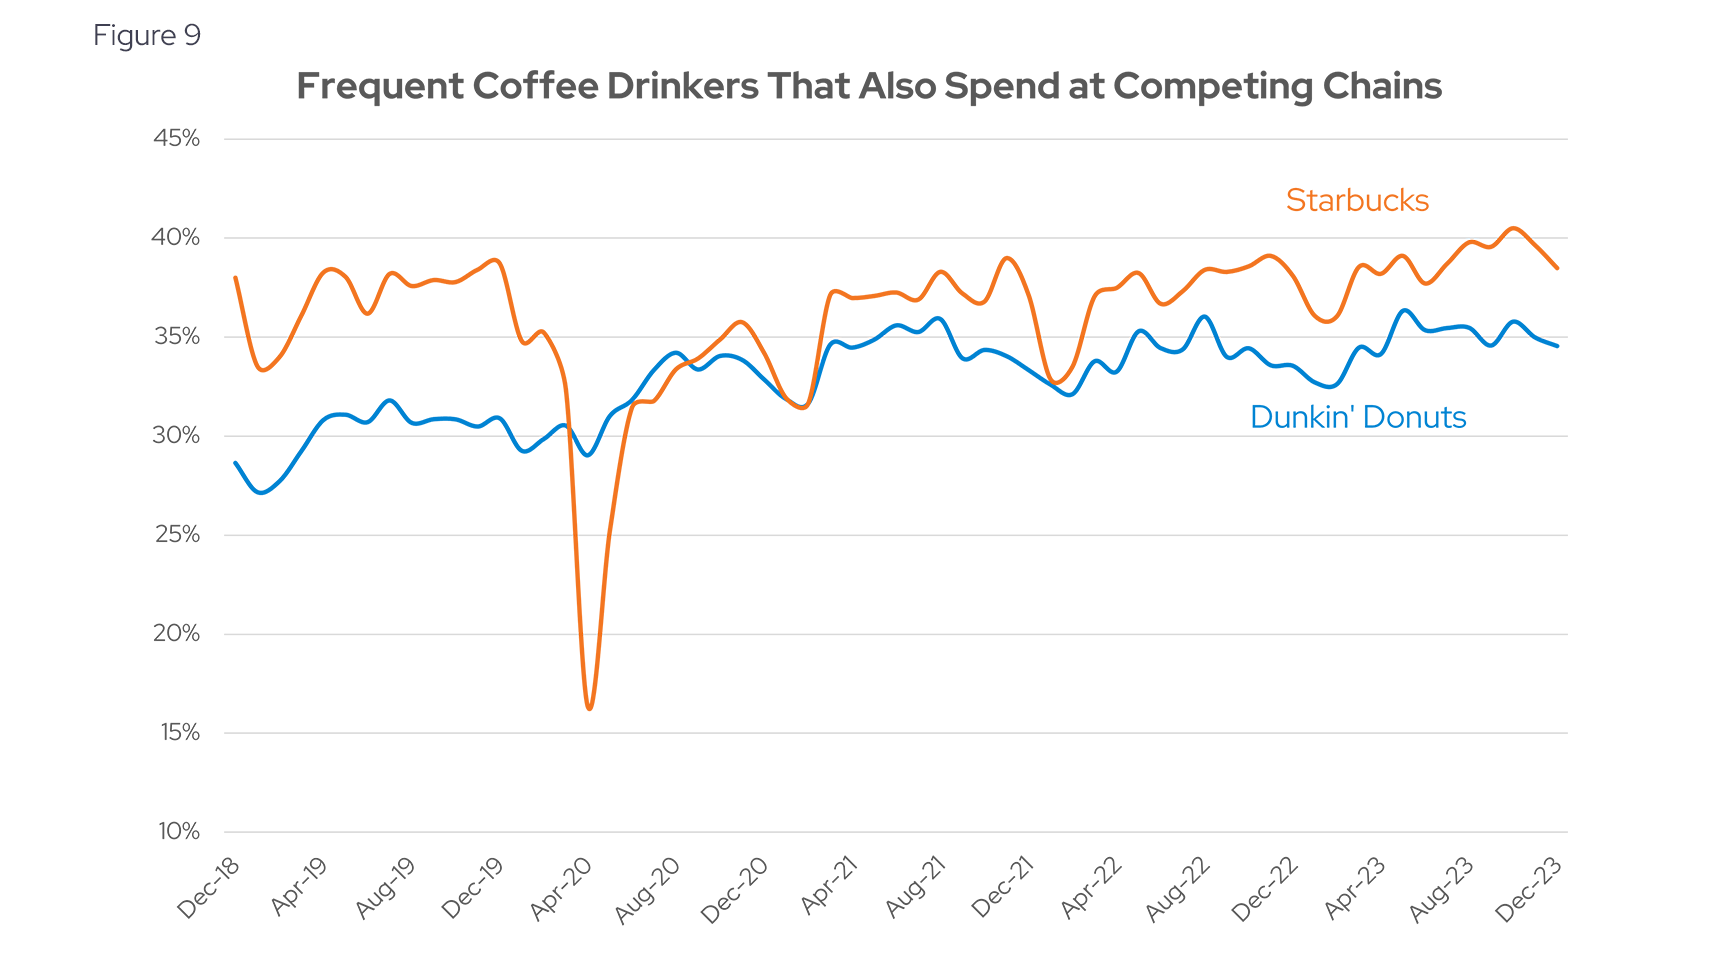 Frequent Coffee Drinkers That Also Spend at Competing Chains